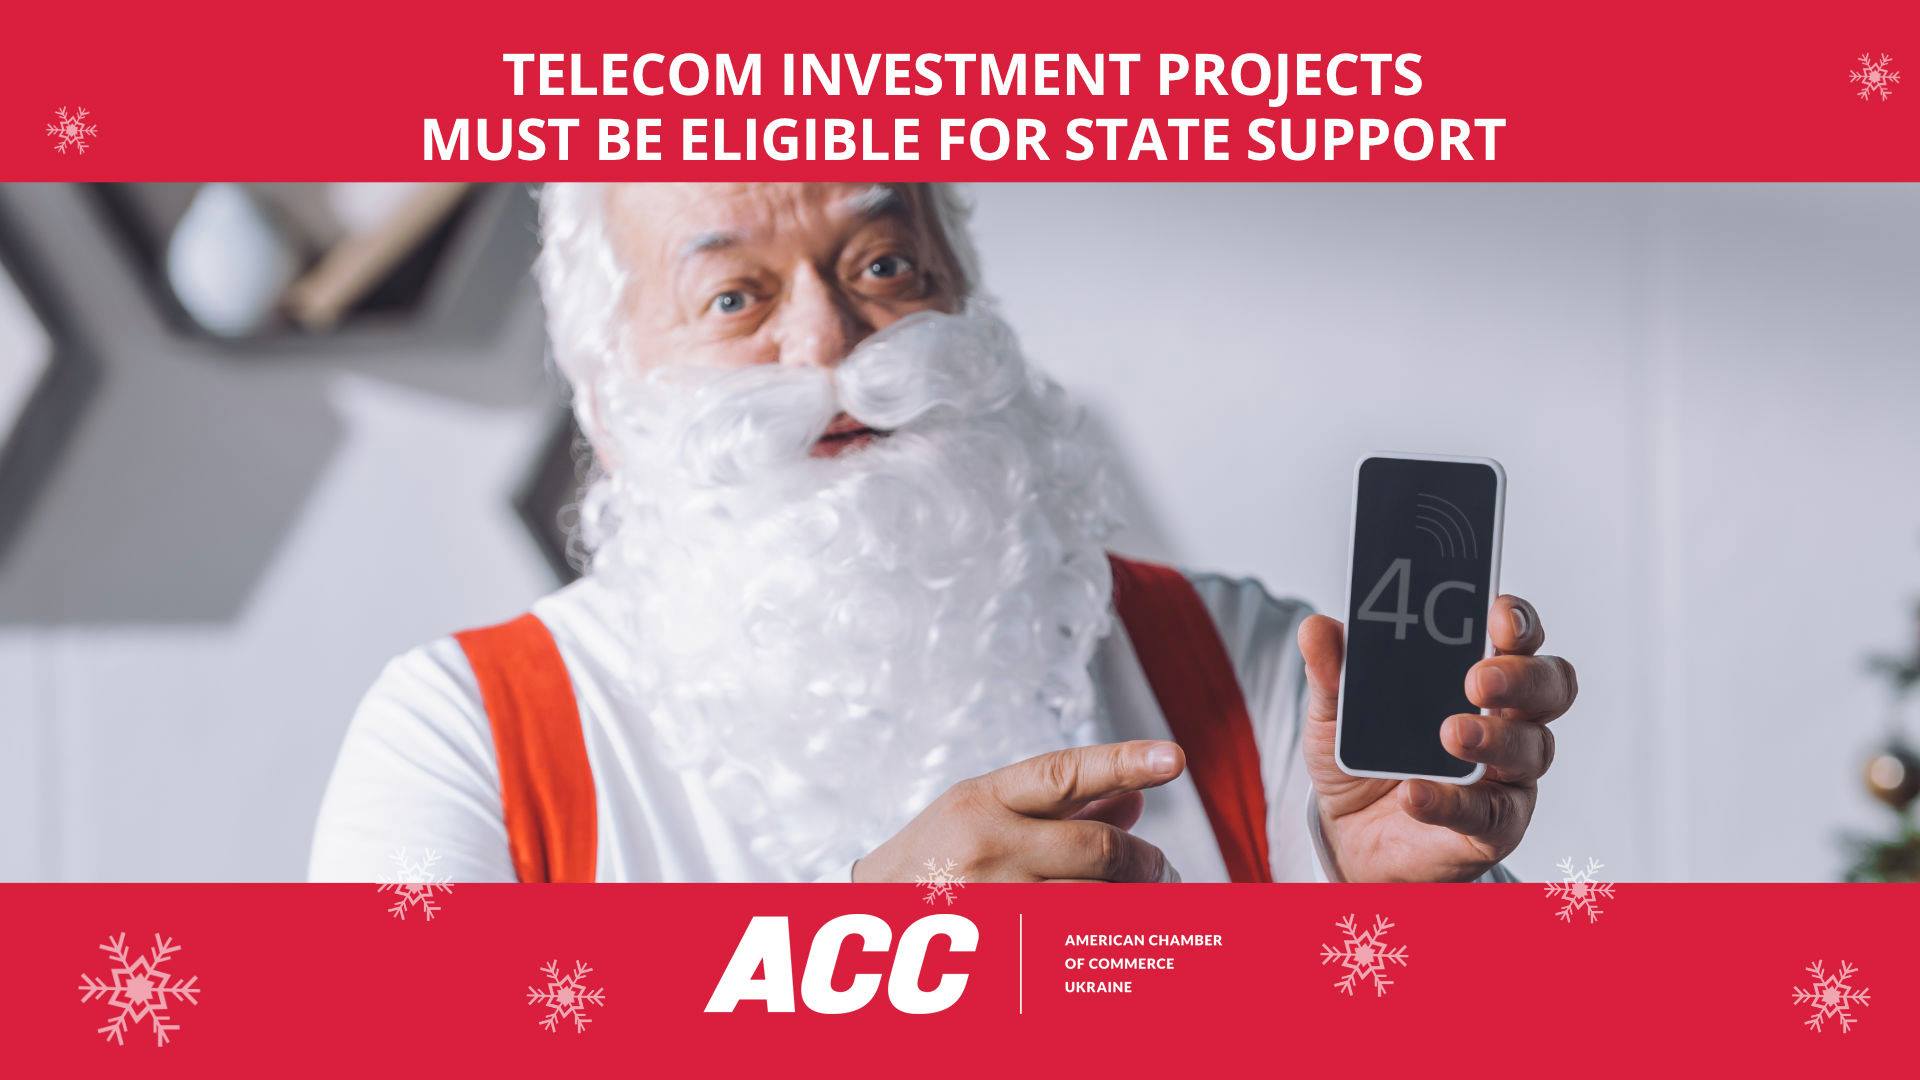 AmCham Ukraine Calls on Members of Parliament to Add Telecom Projects to the List of Investment Projects Eligible for State Support